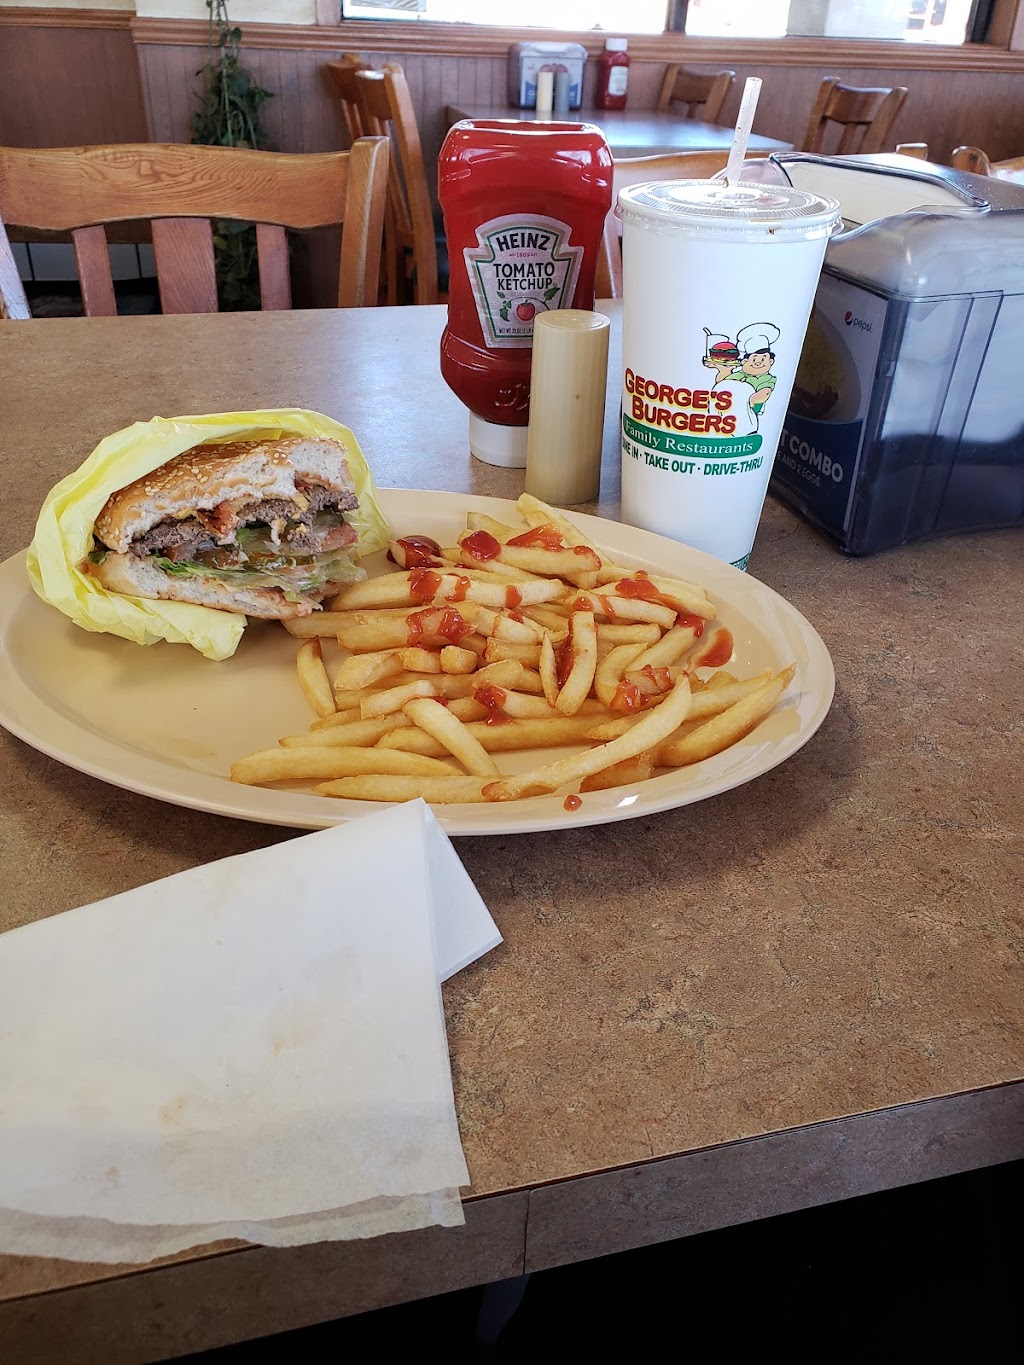 Georges Burgers | 17510 Foothill Blvd, Fontana, CA 92335 | Phone: (909) 355-3998